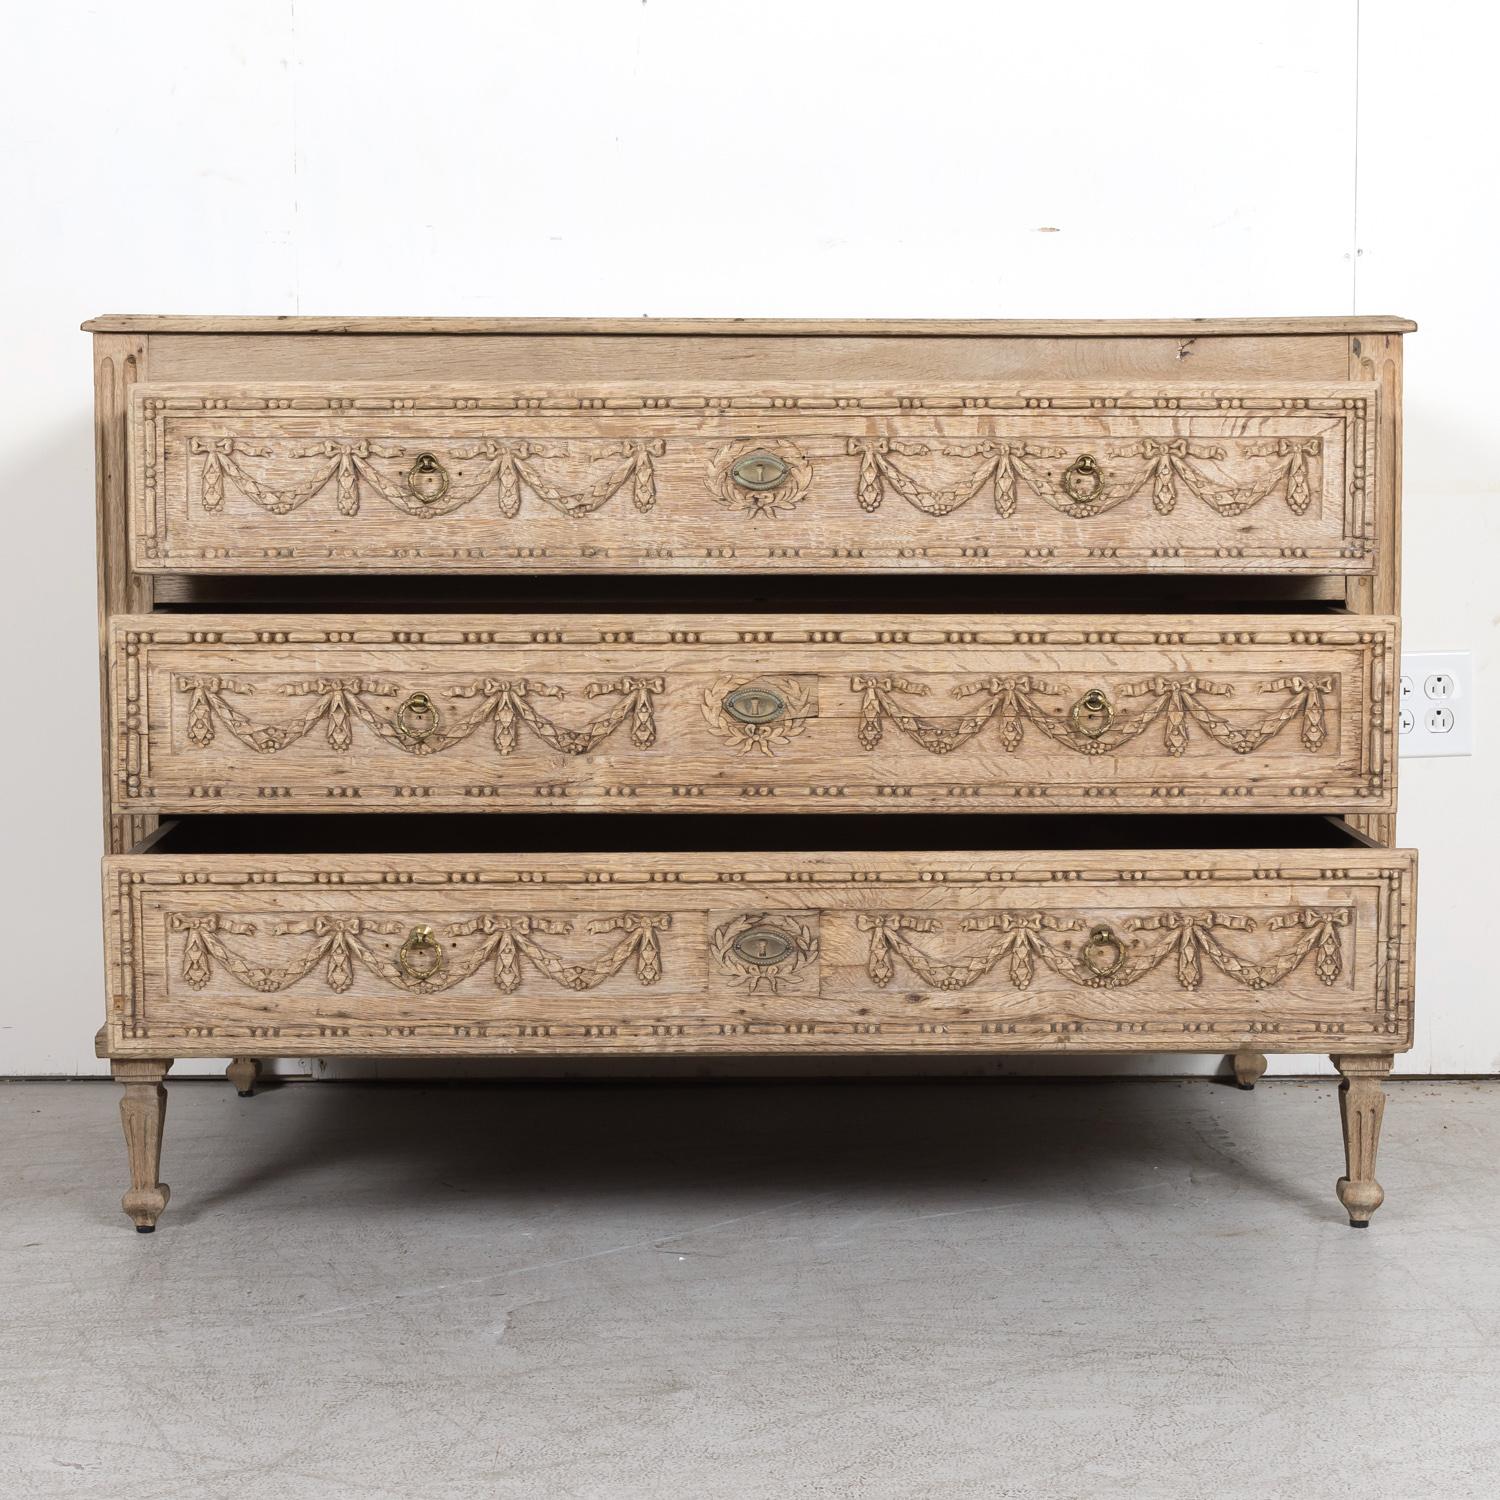 Early 19th Century French Louis XVI Style Bleached Oak Provençal Commode 6